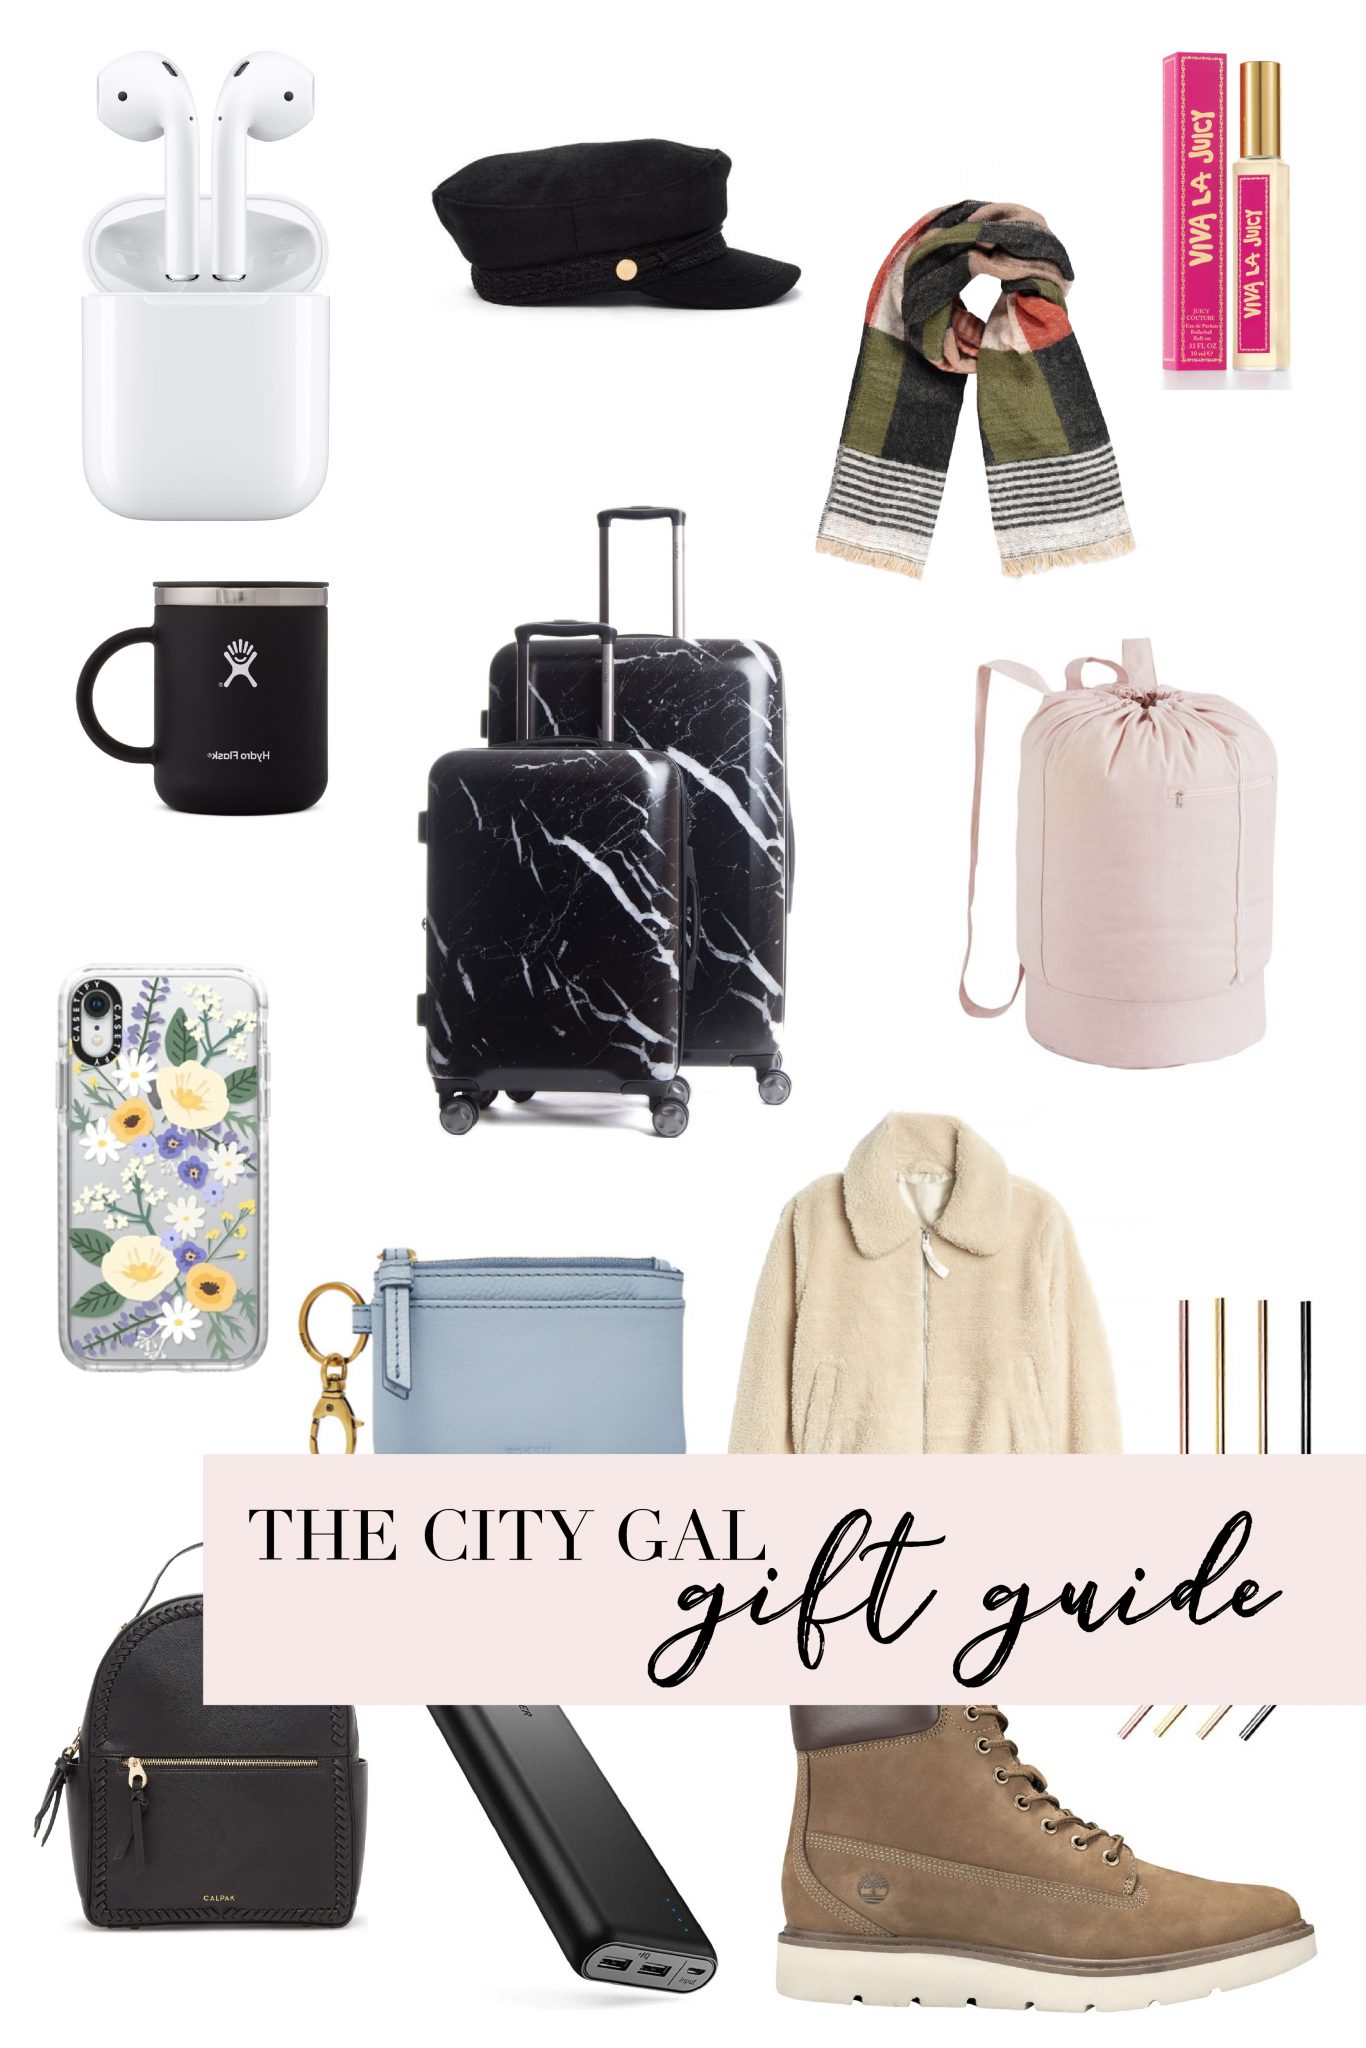 GIFT GUIDE: The City Gal